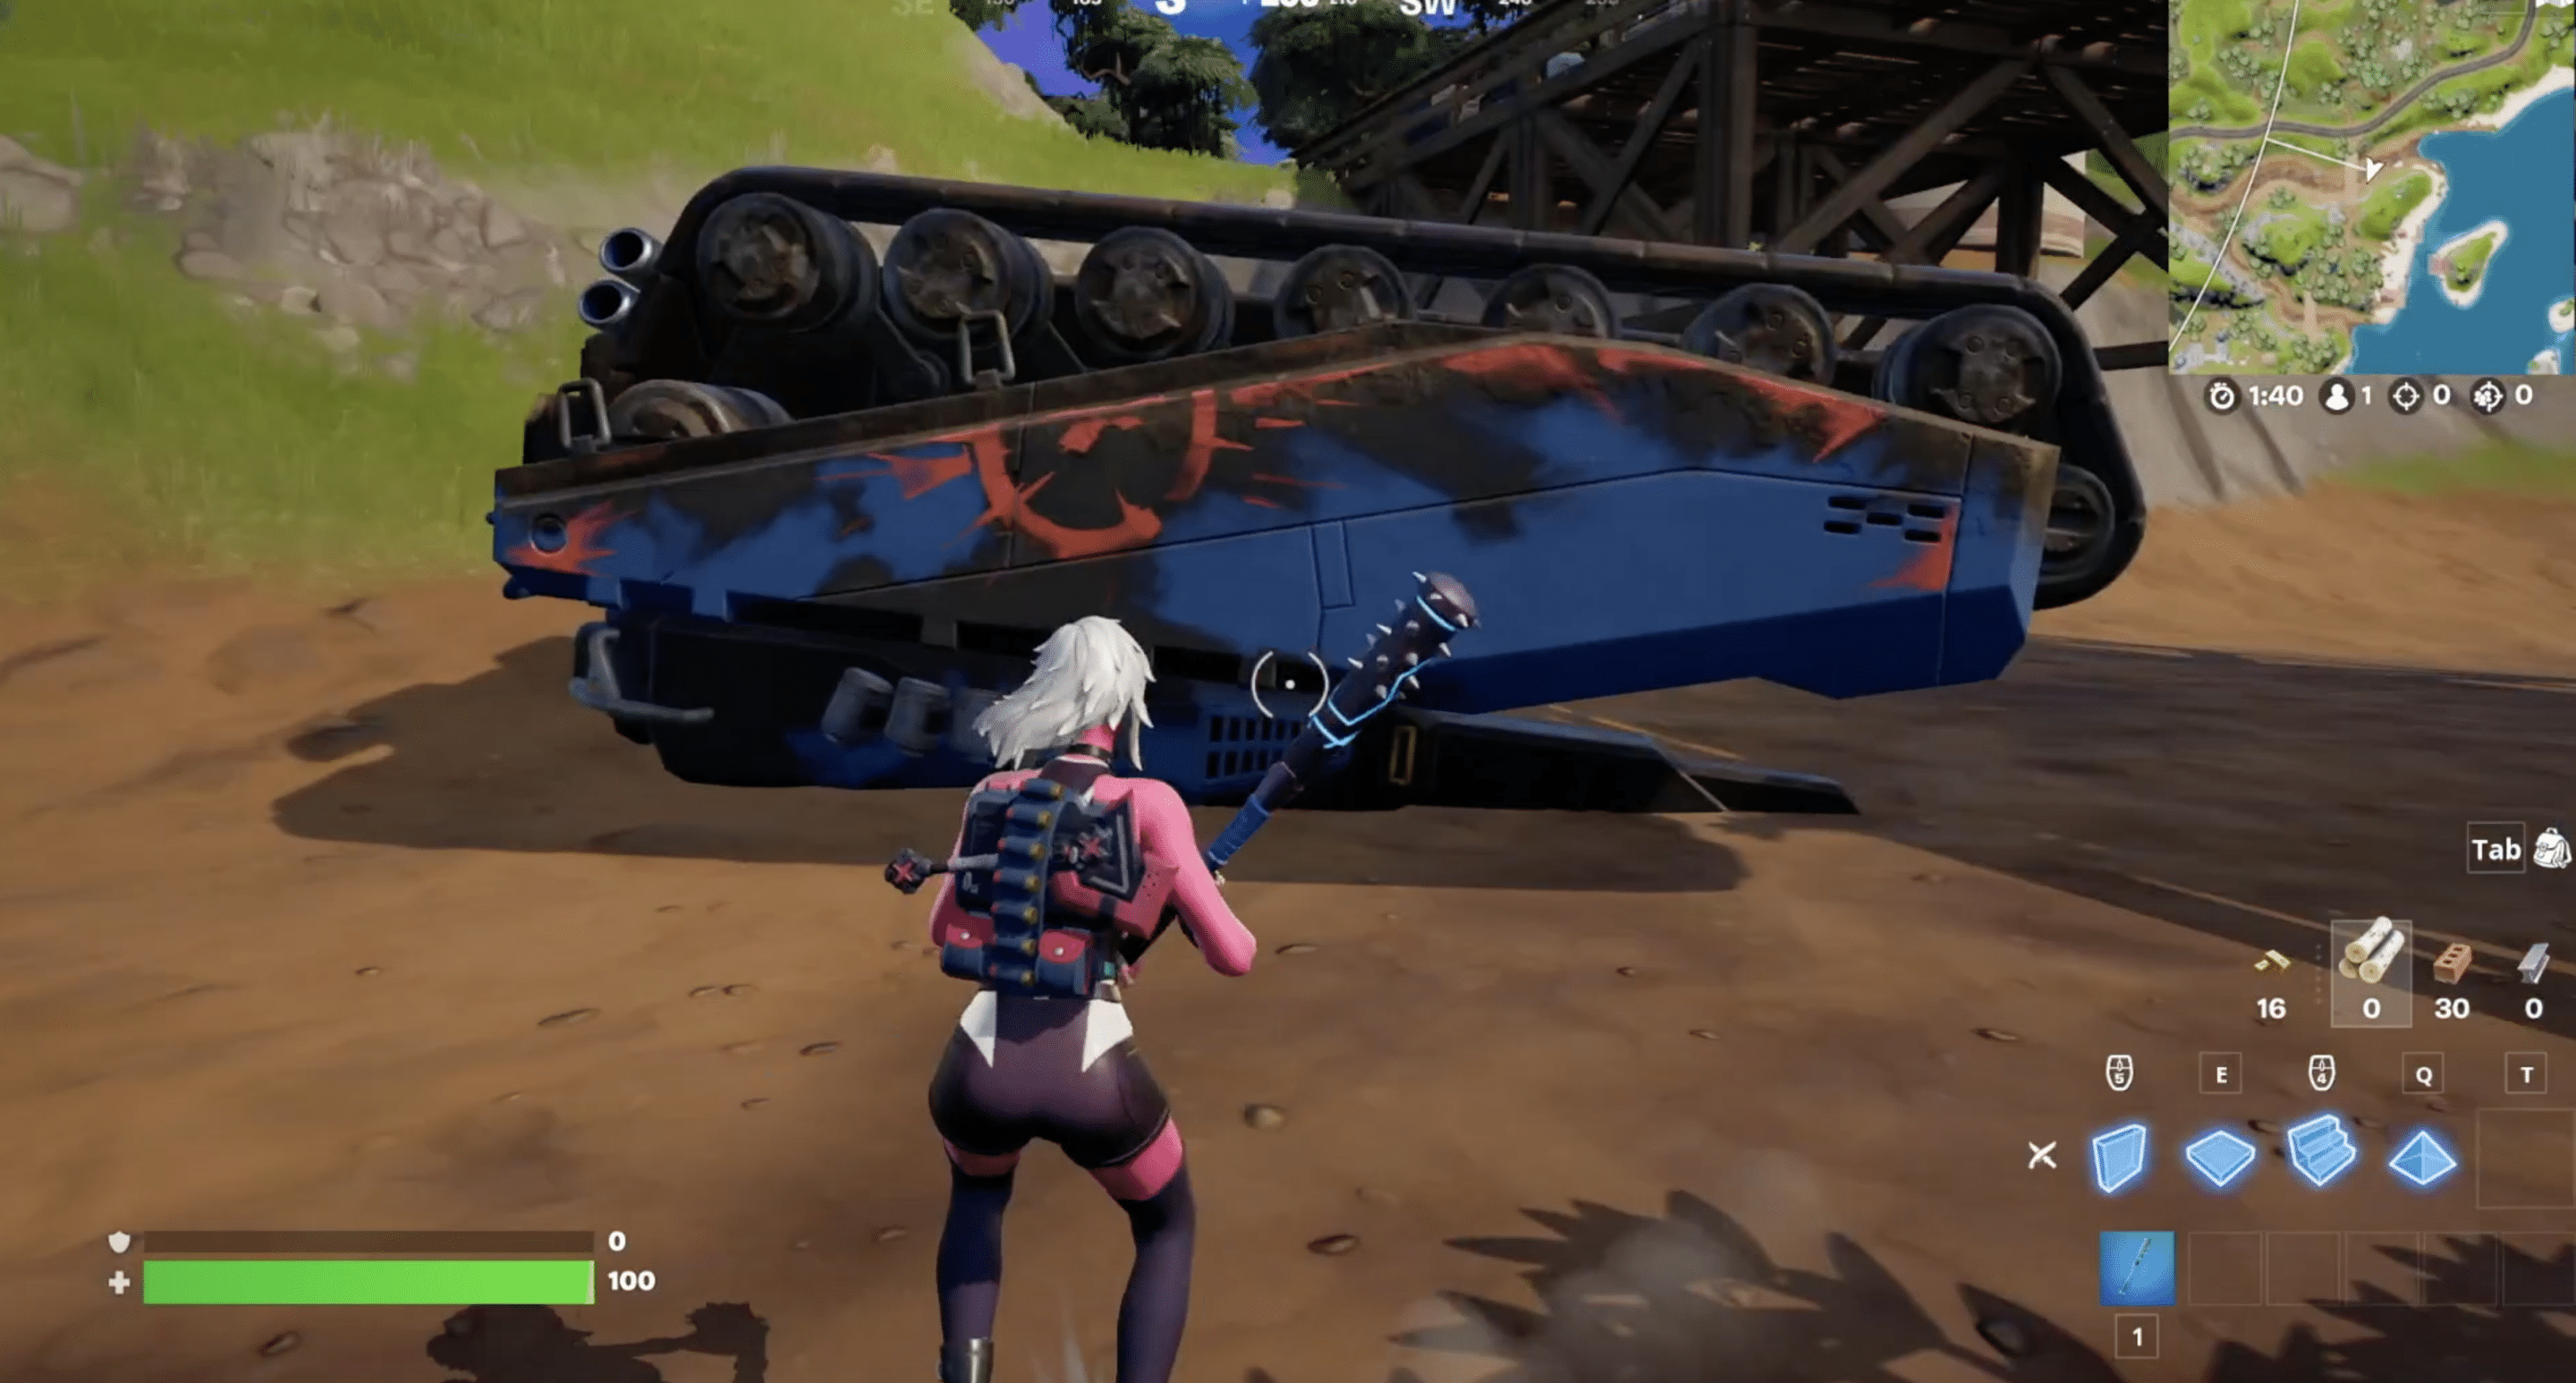 How to flip a car or tank in Fortnite